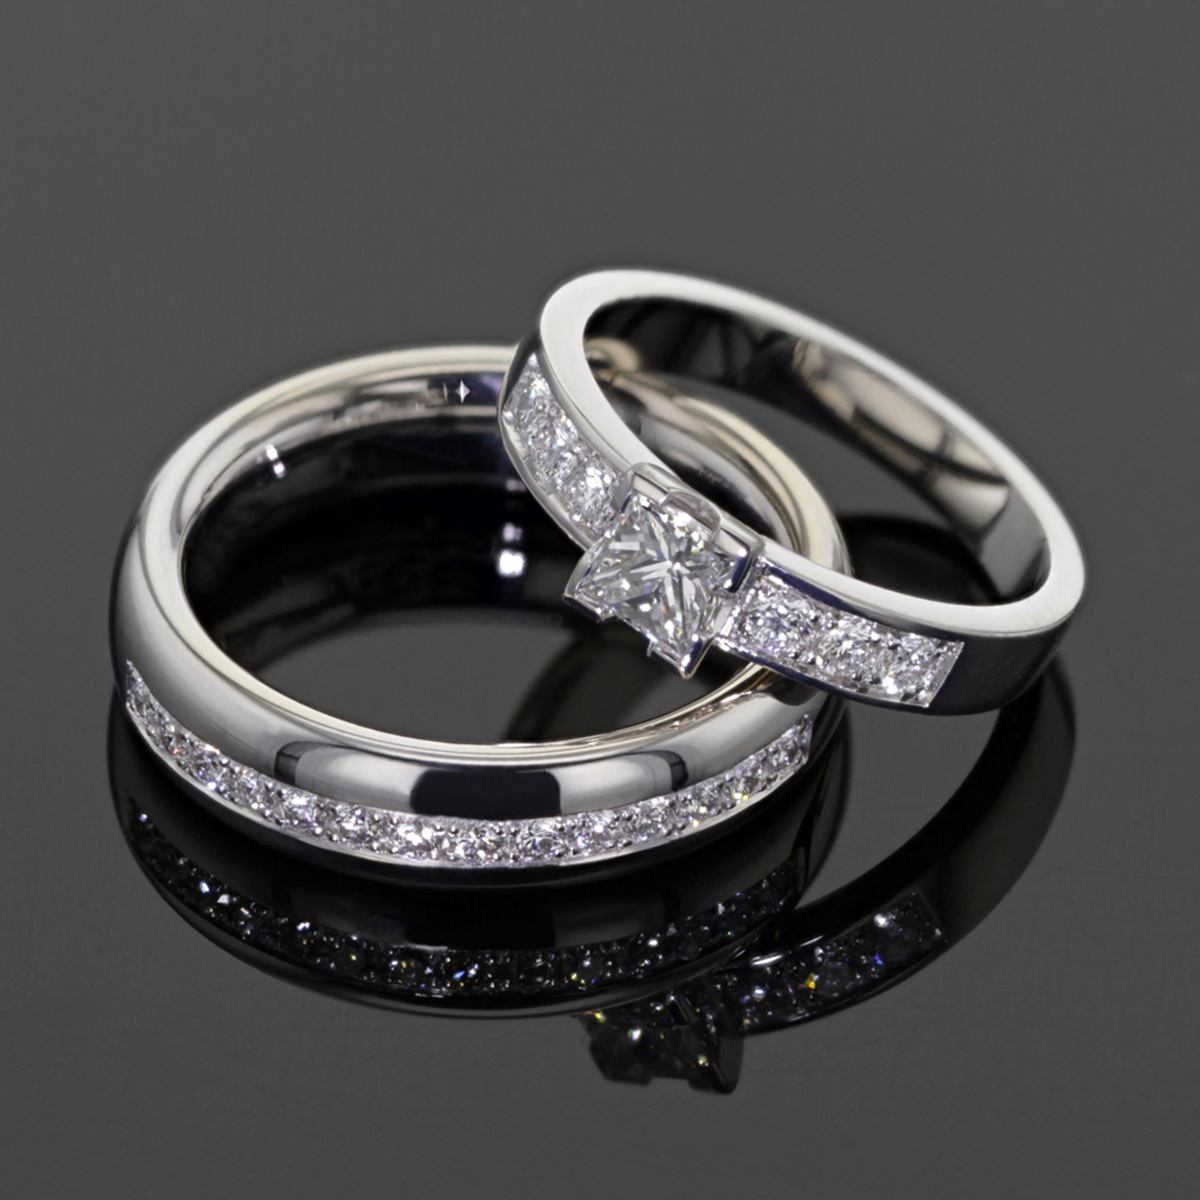 Exclusive wedding and engagement rings Mauritius